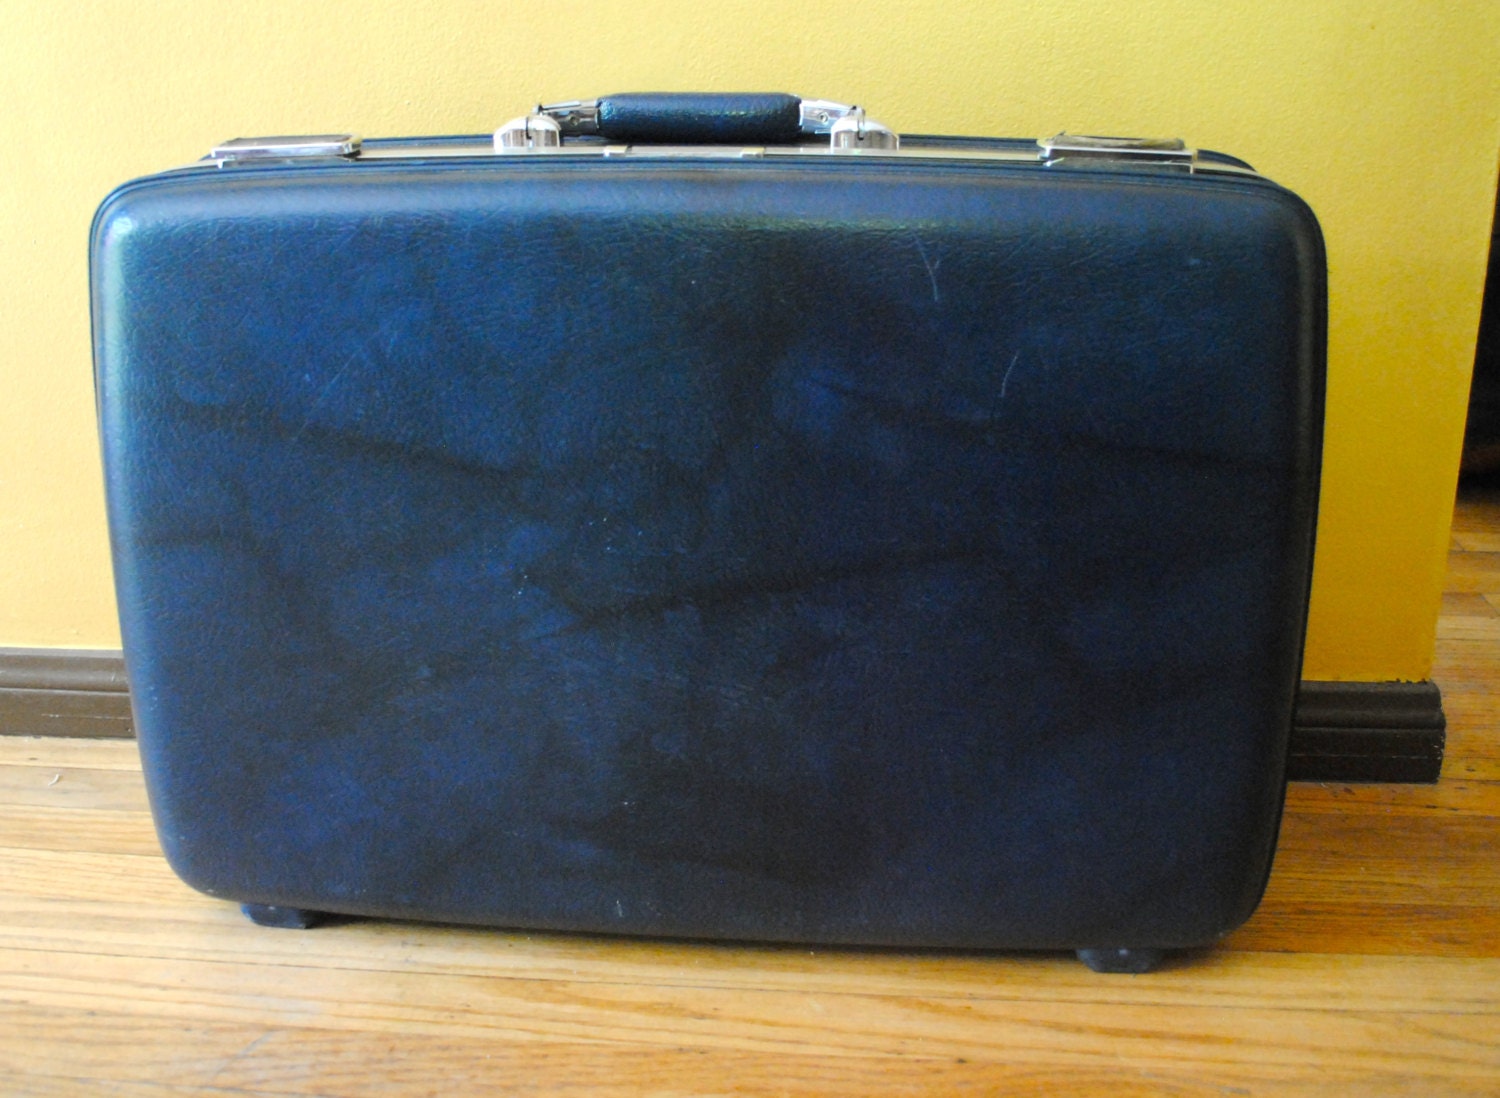 AMERICAN TOURISTER 1960's luggage by ROCKINQUEEN on Etsy